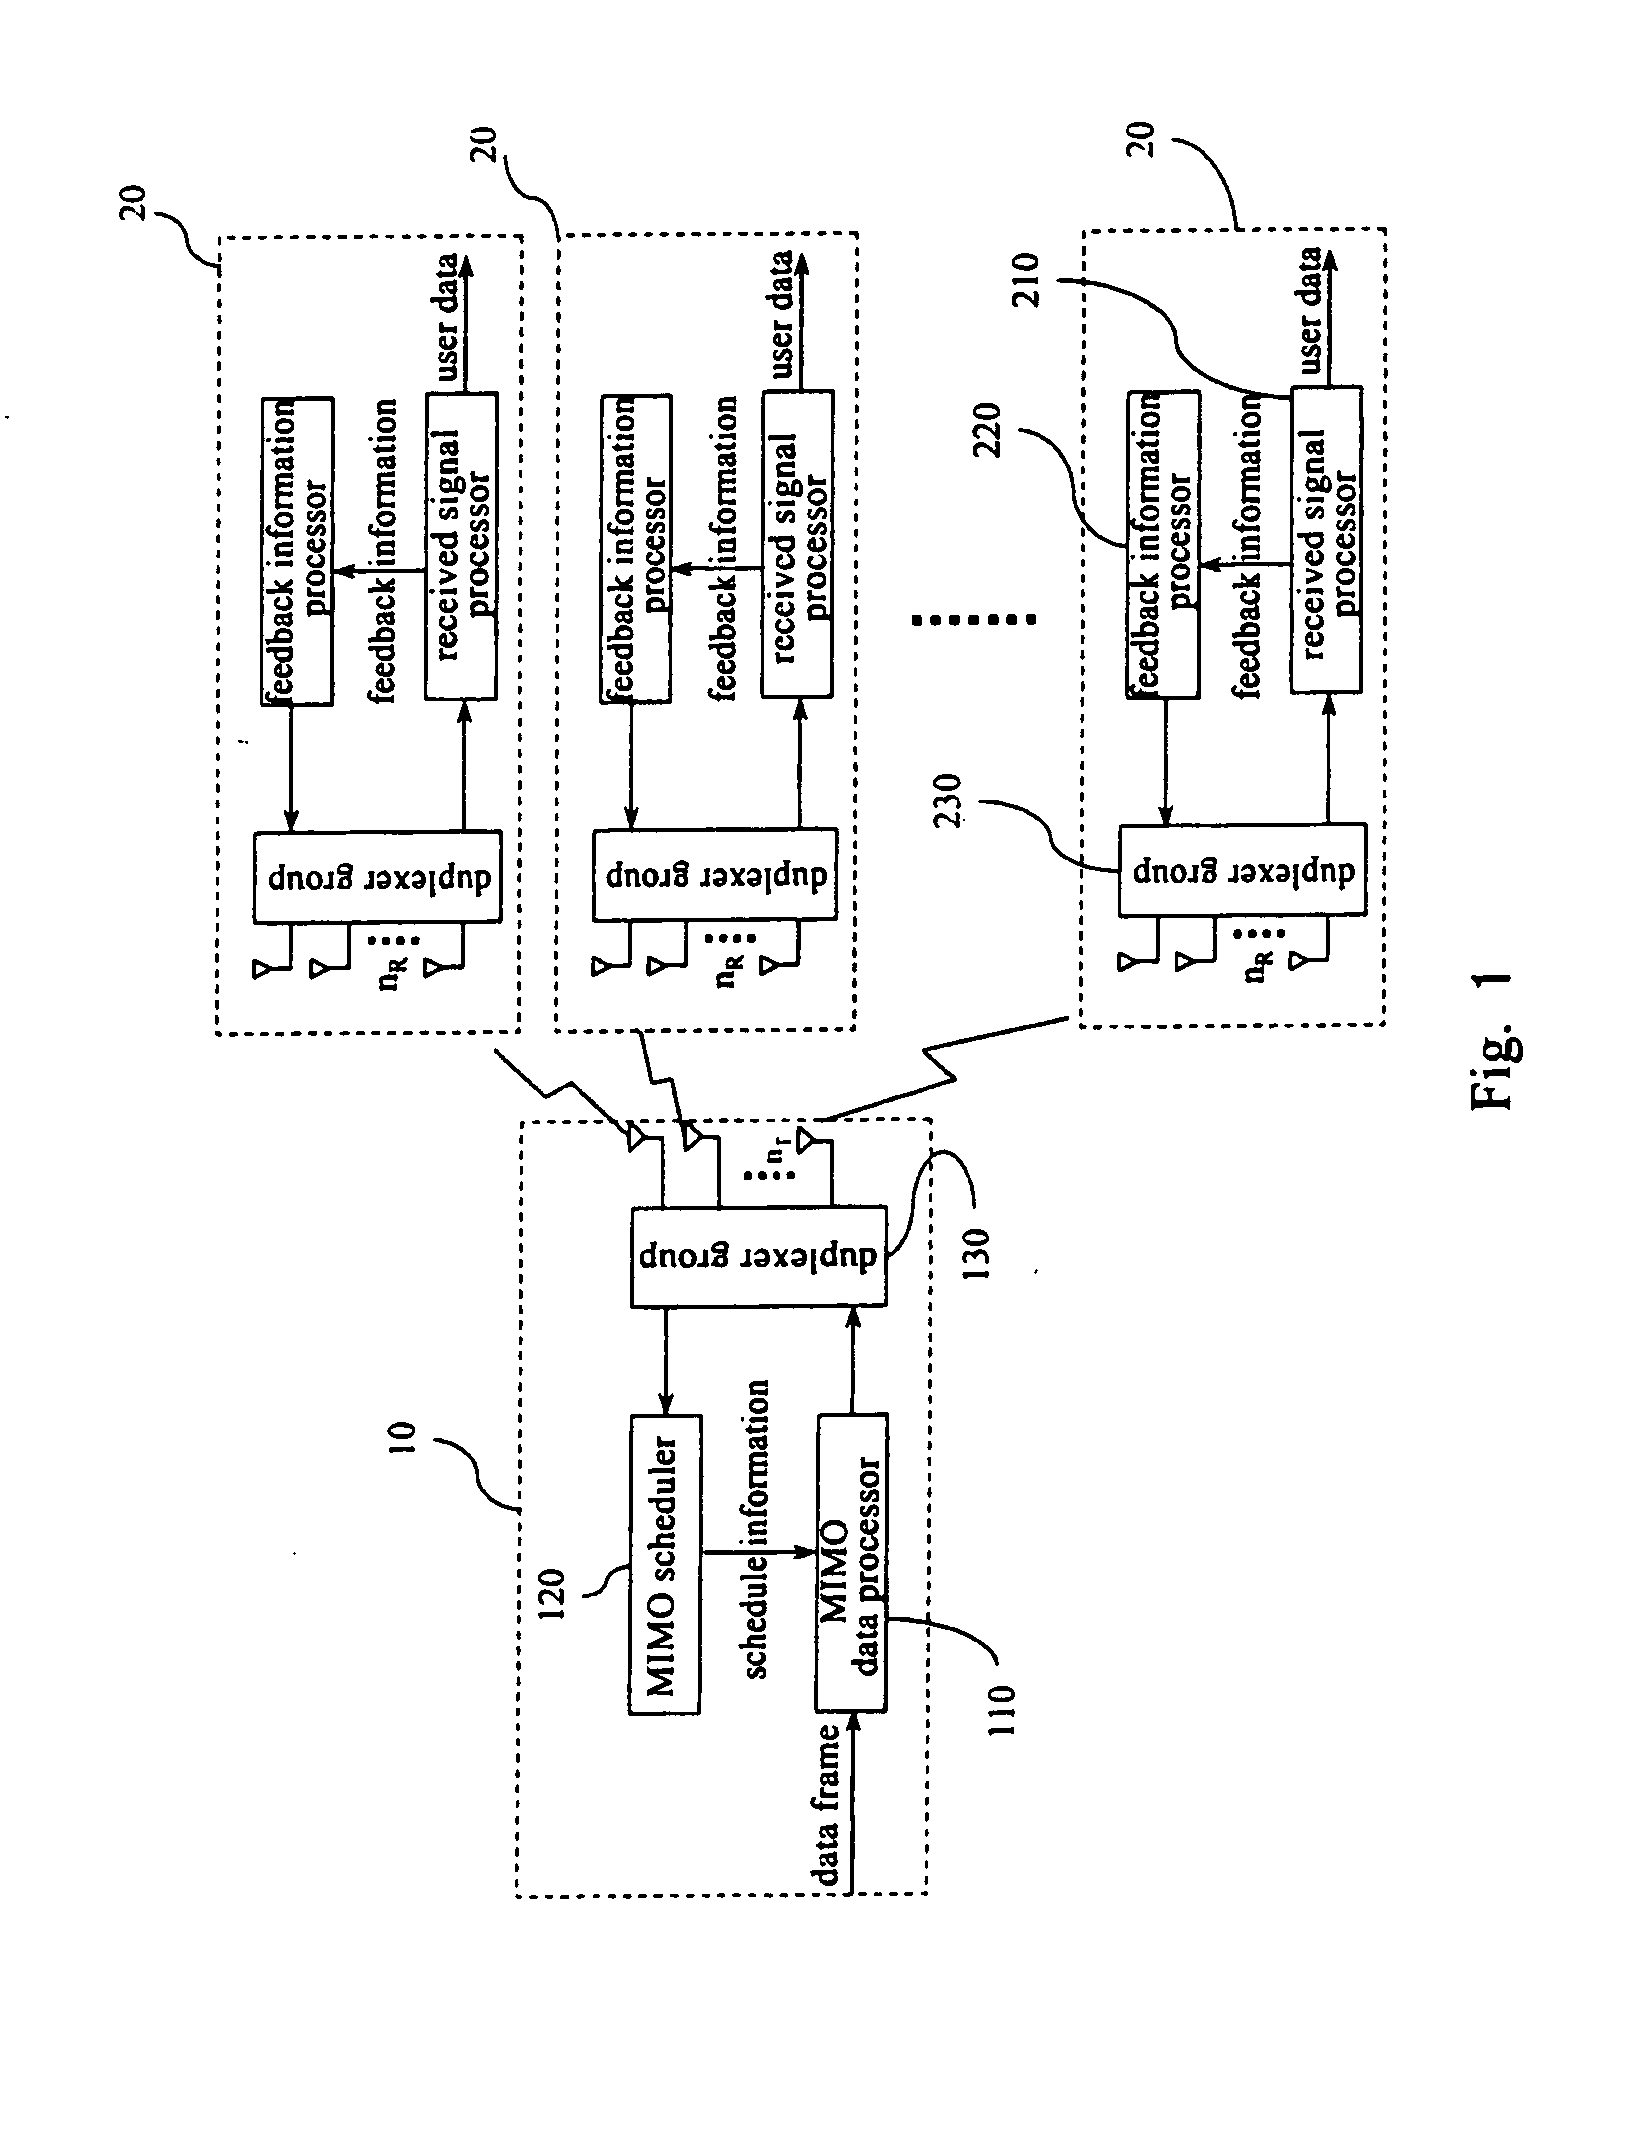 MIMO communication system and user scheduling method